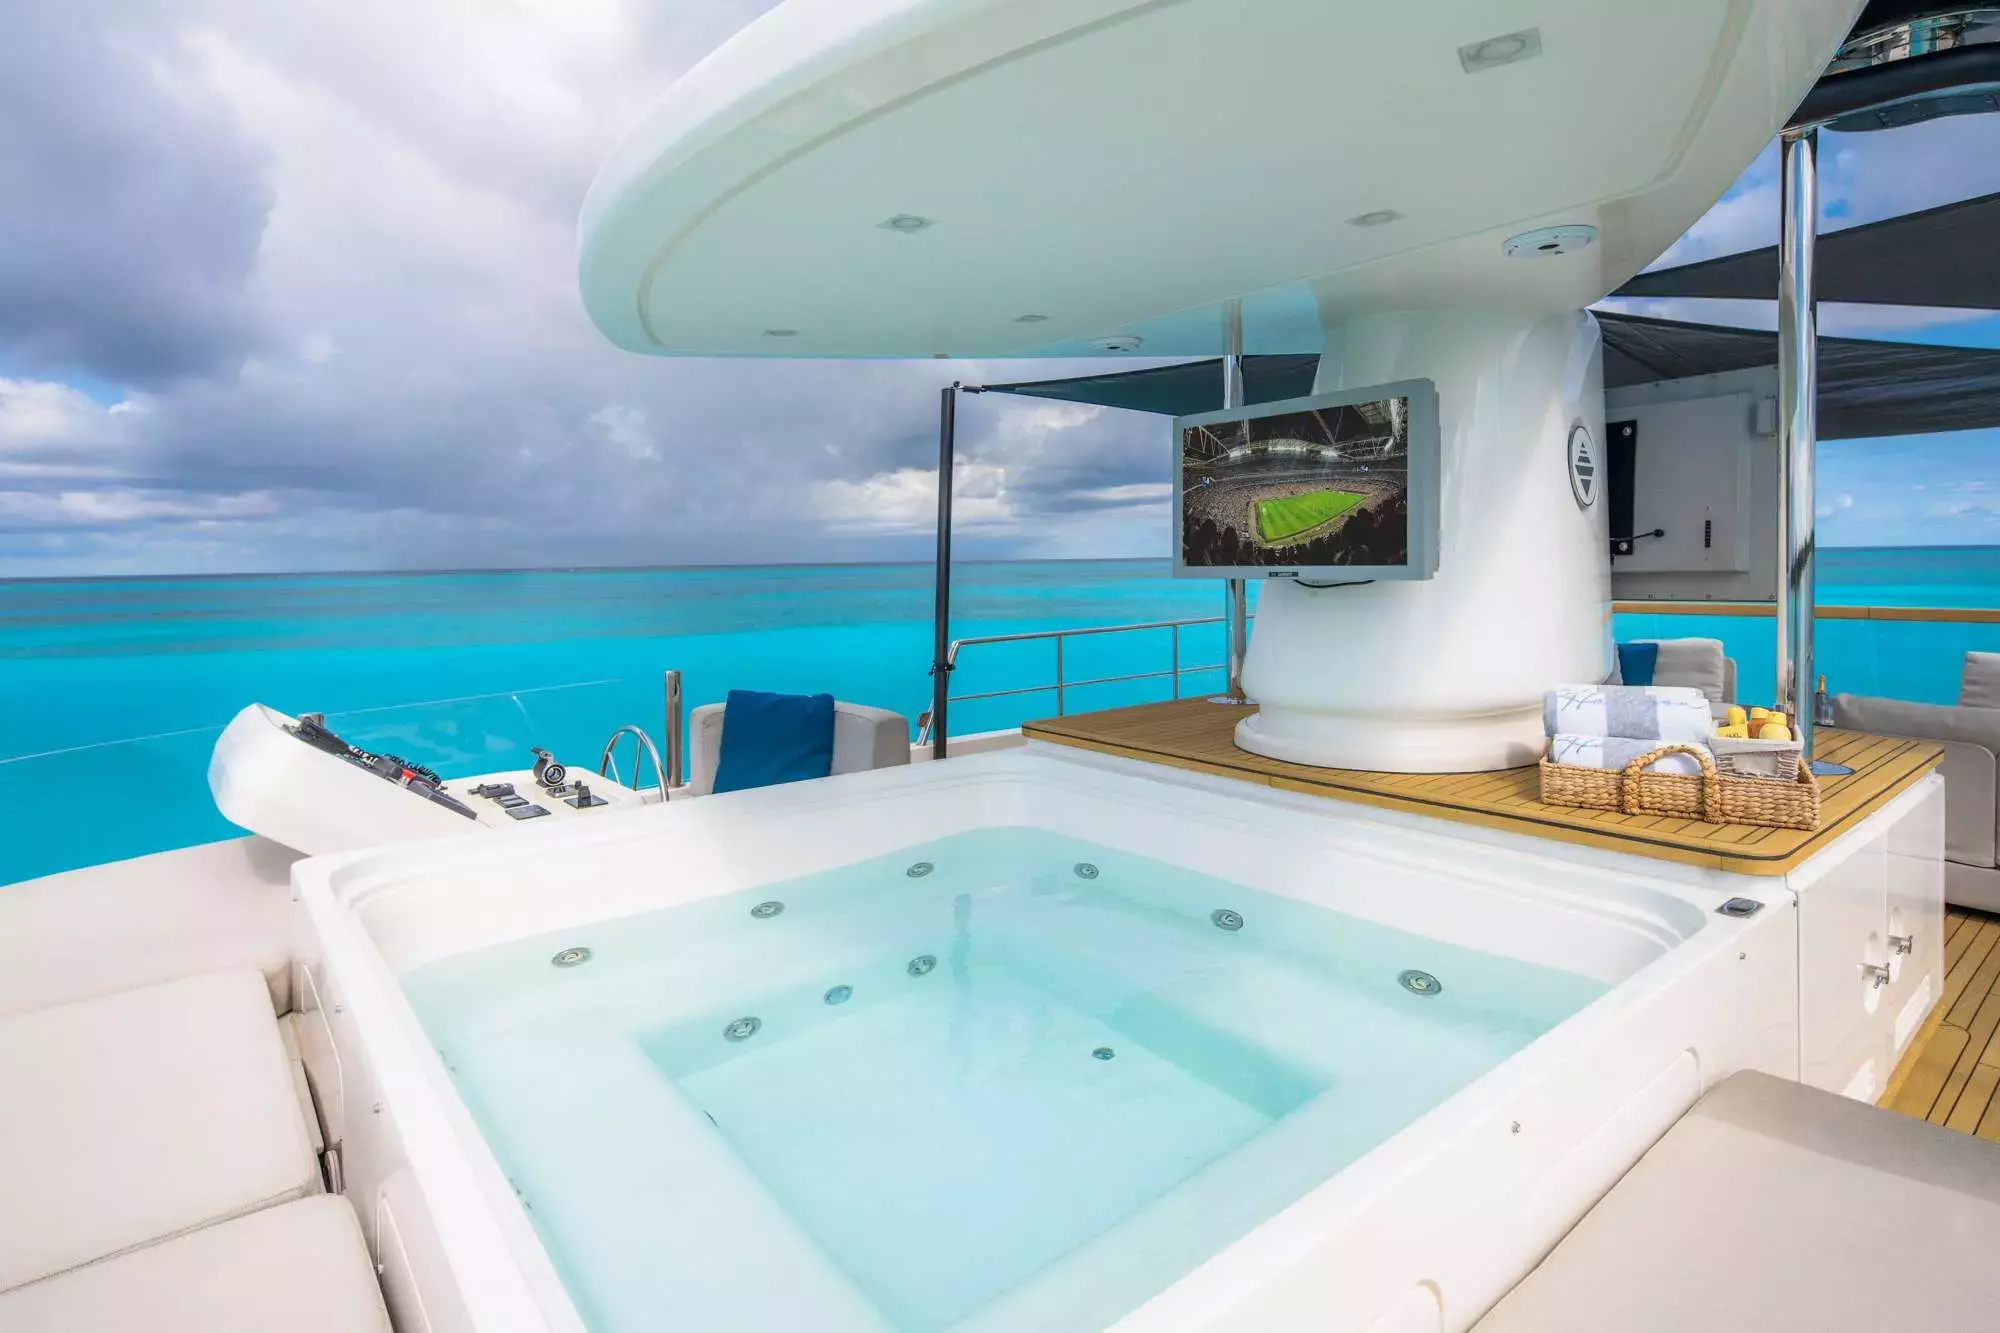 Halcyon by Sanlorenzo - Top rates for a Charter of a private Motor Yacht in St Barths